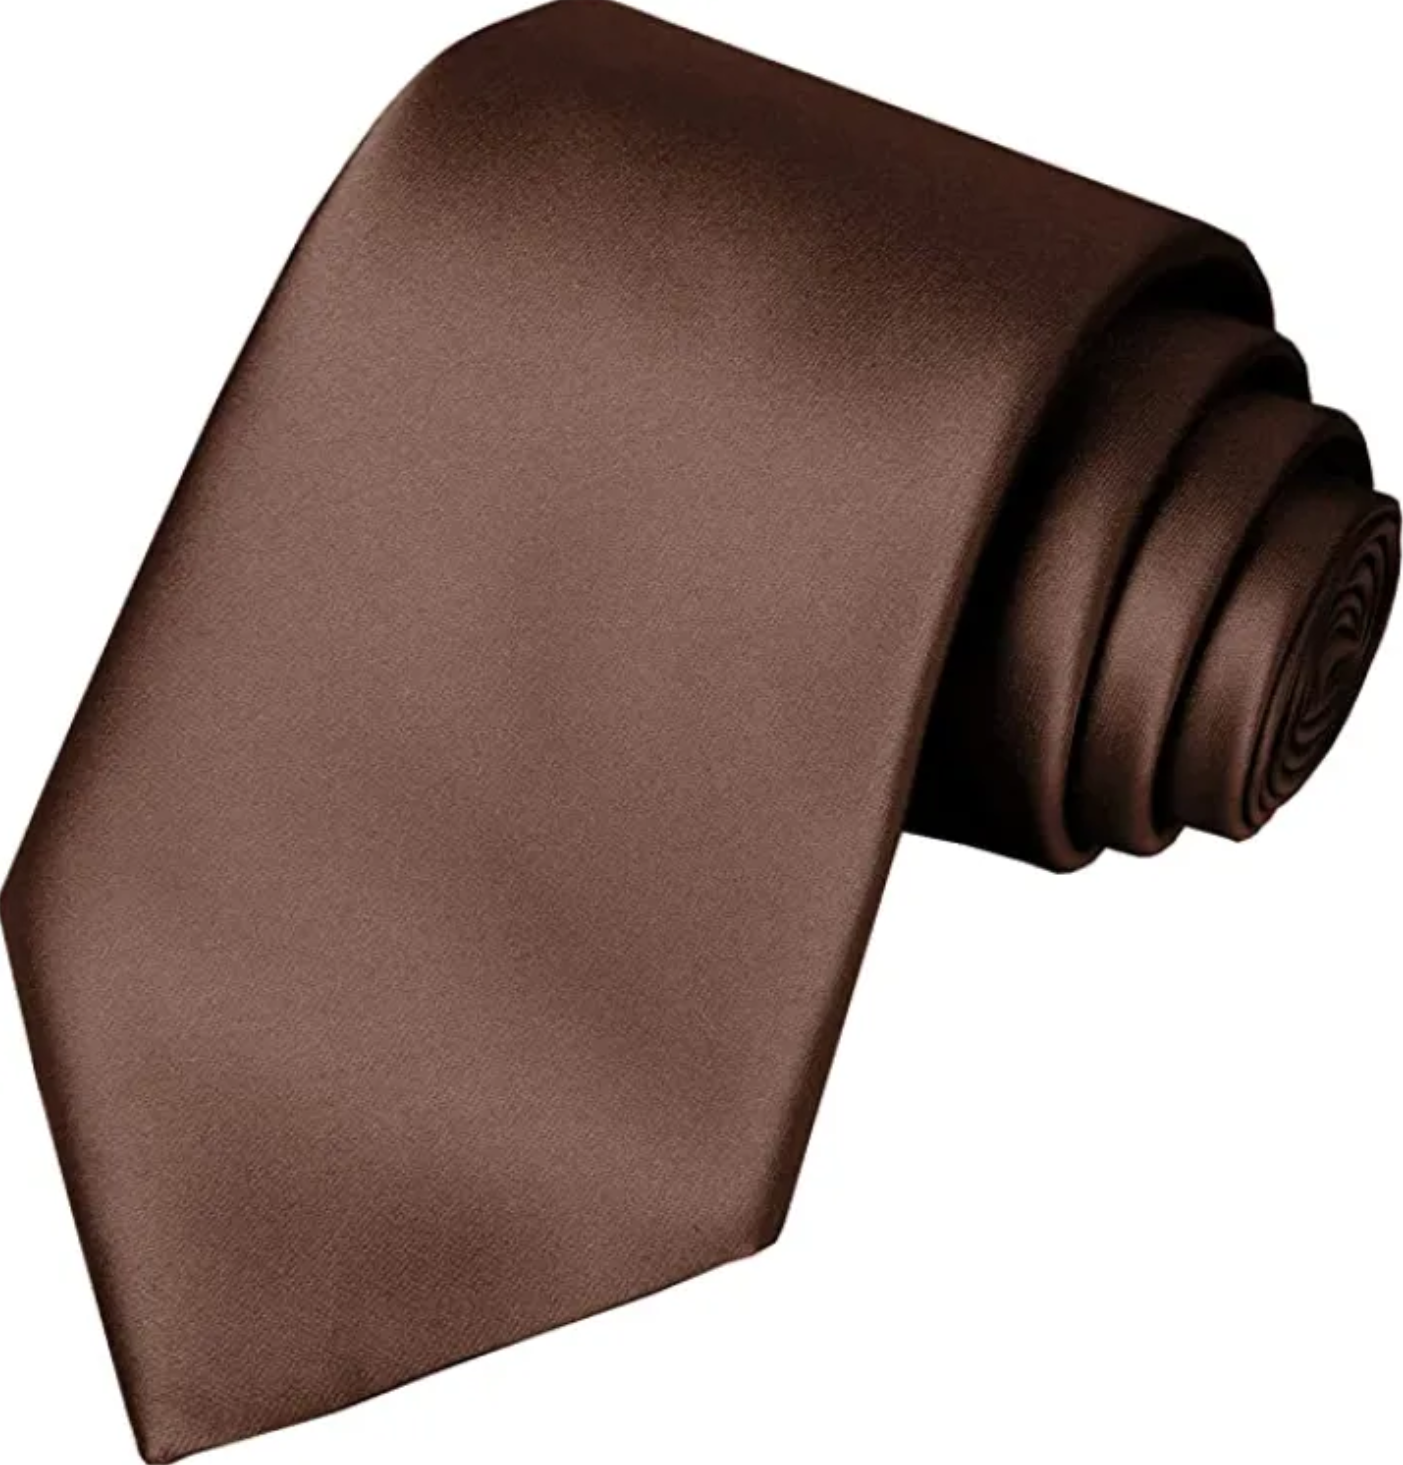 Necktie for Fashion and Casual use Necktie Plain